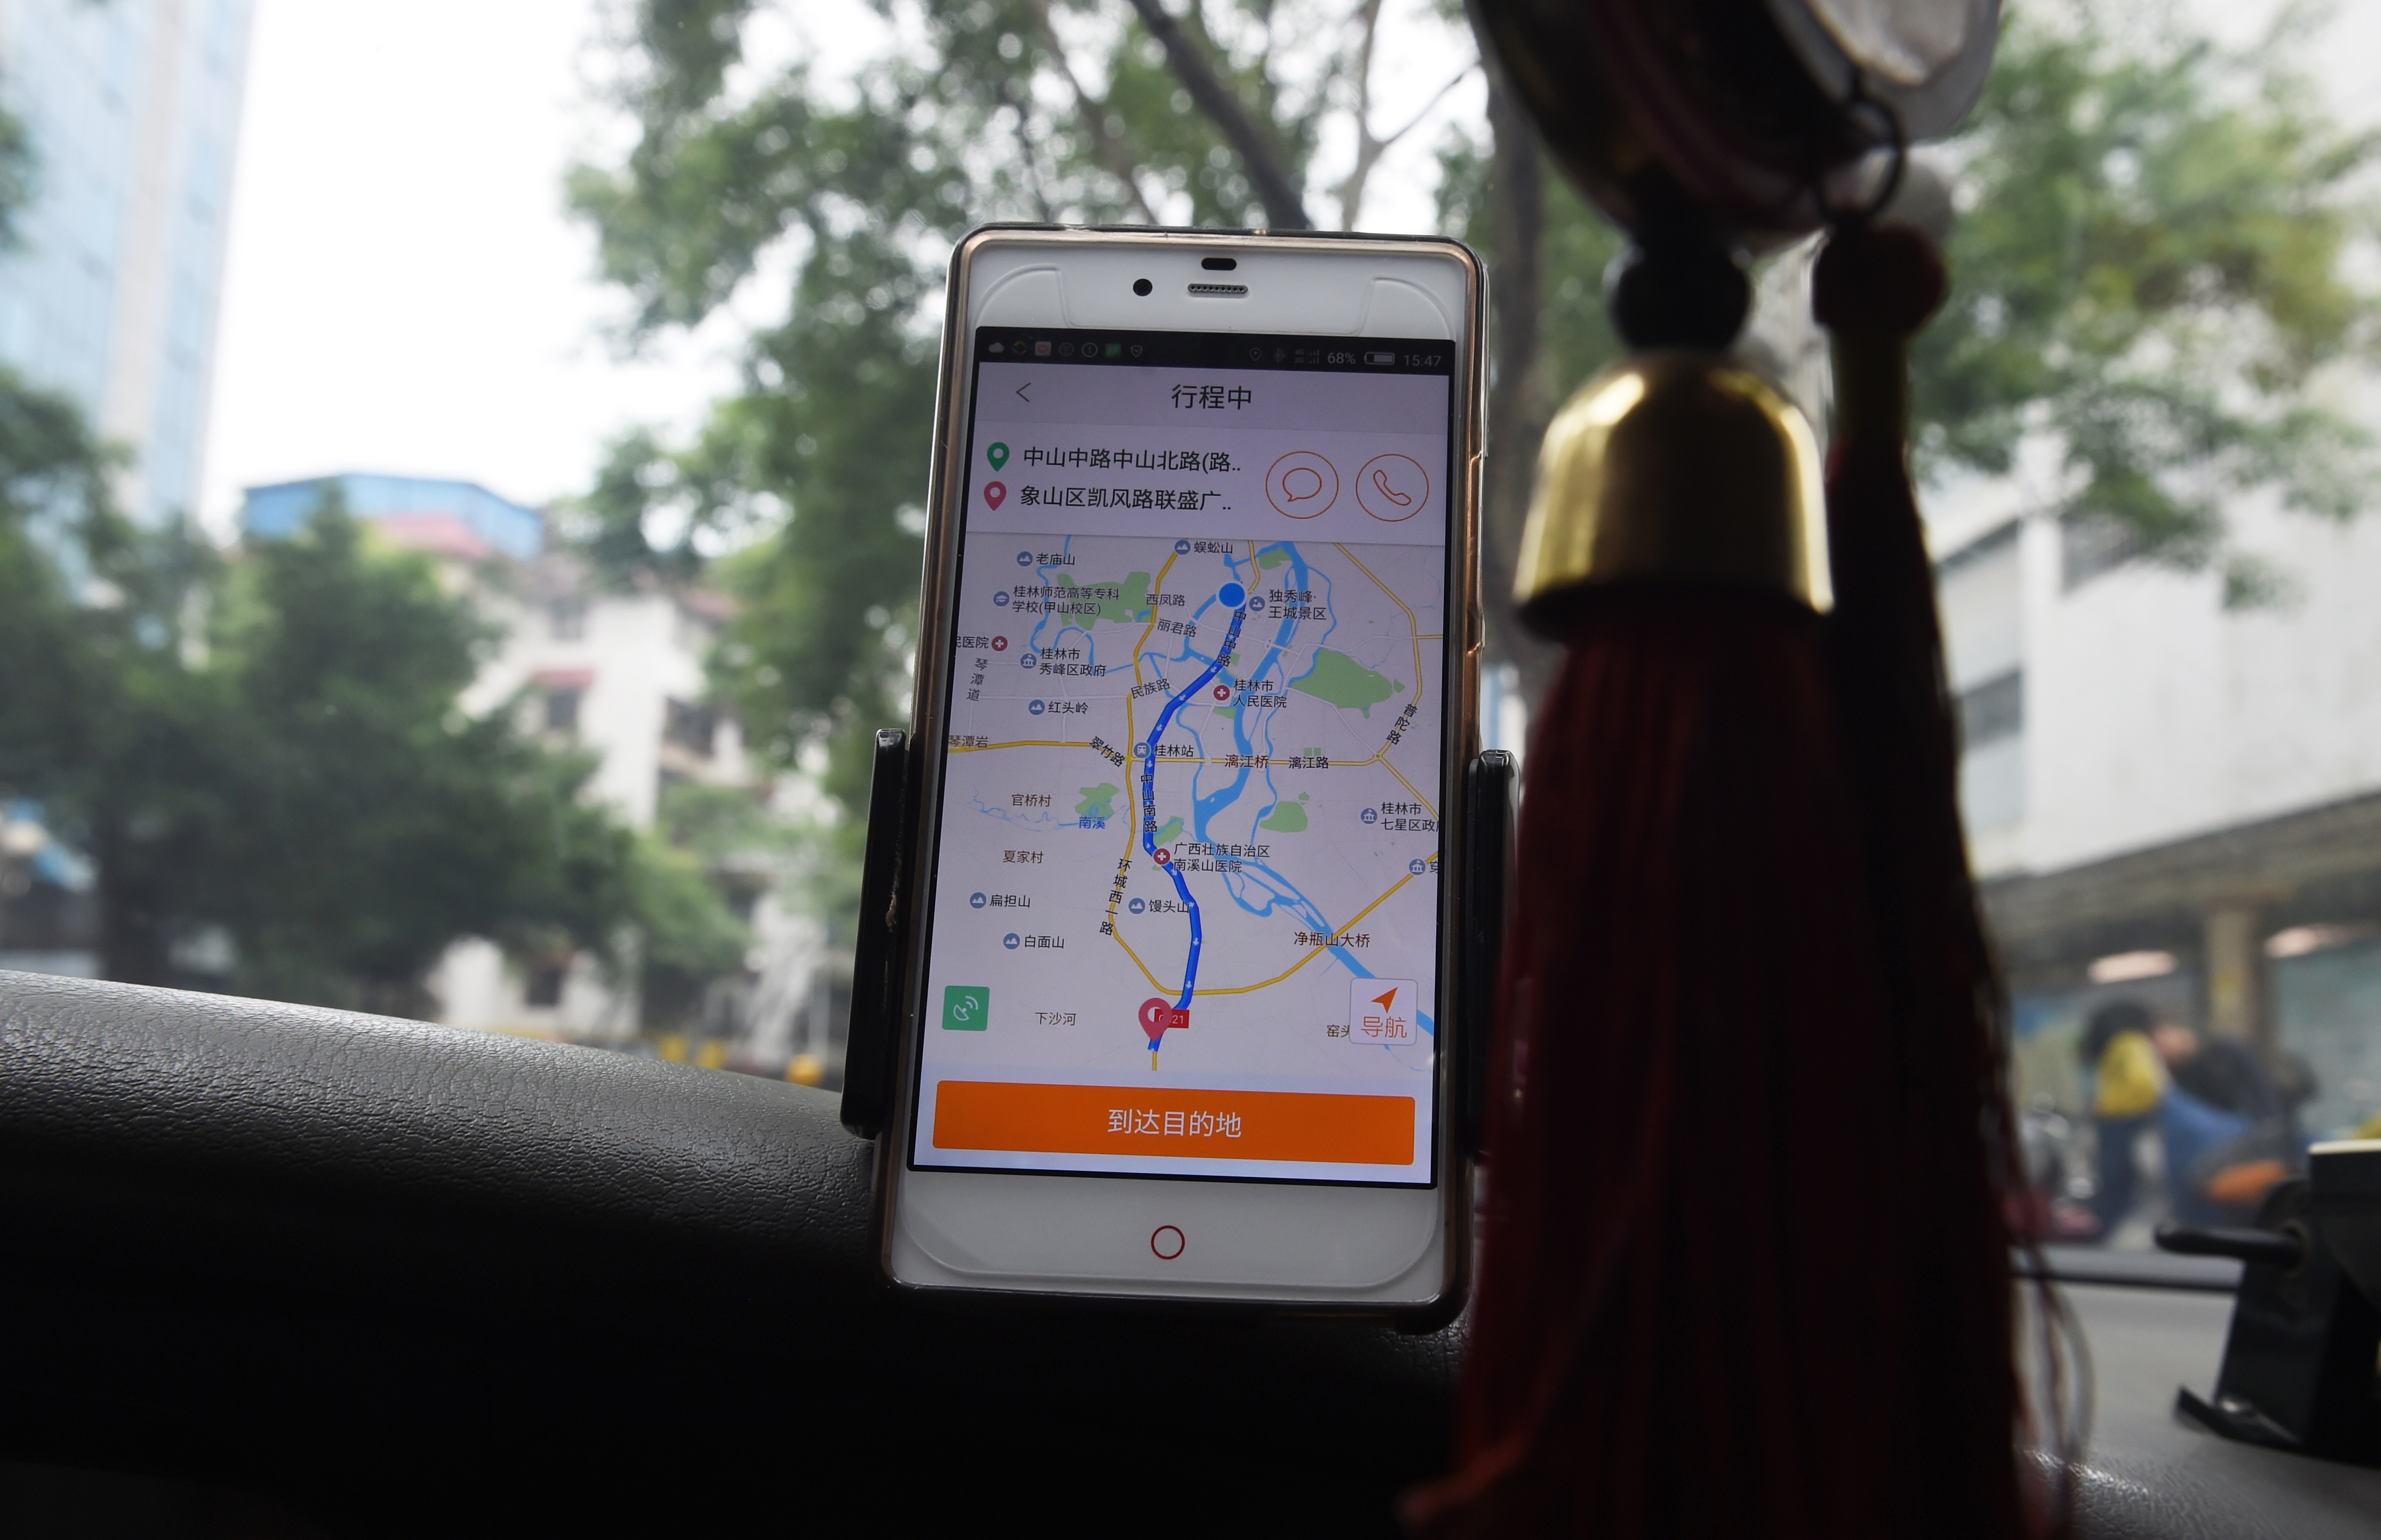 A taxi driver uses the Didi Chuxing app while driving along a street in Guilin, in China's southern Guangxi region on May 13, 2016. Apple has invested 1 billion USD in Chinese ride hailing app Didi Chuxing, the Beijing company said on May 13, as it vies with bitter US-based rival Uber for market share in China. / AFP PHOTO / GREG BAKER